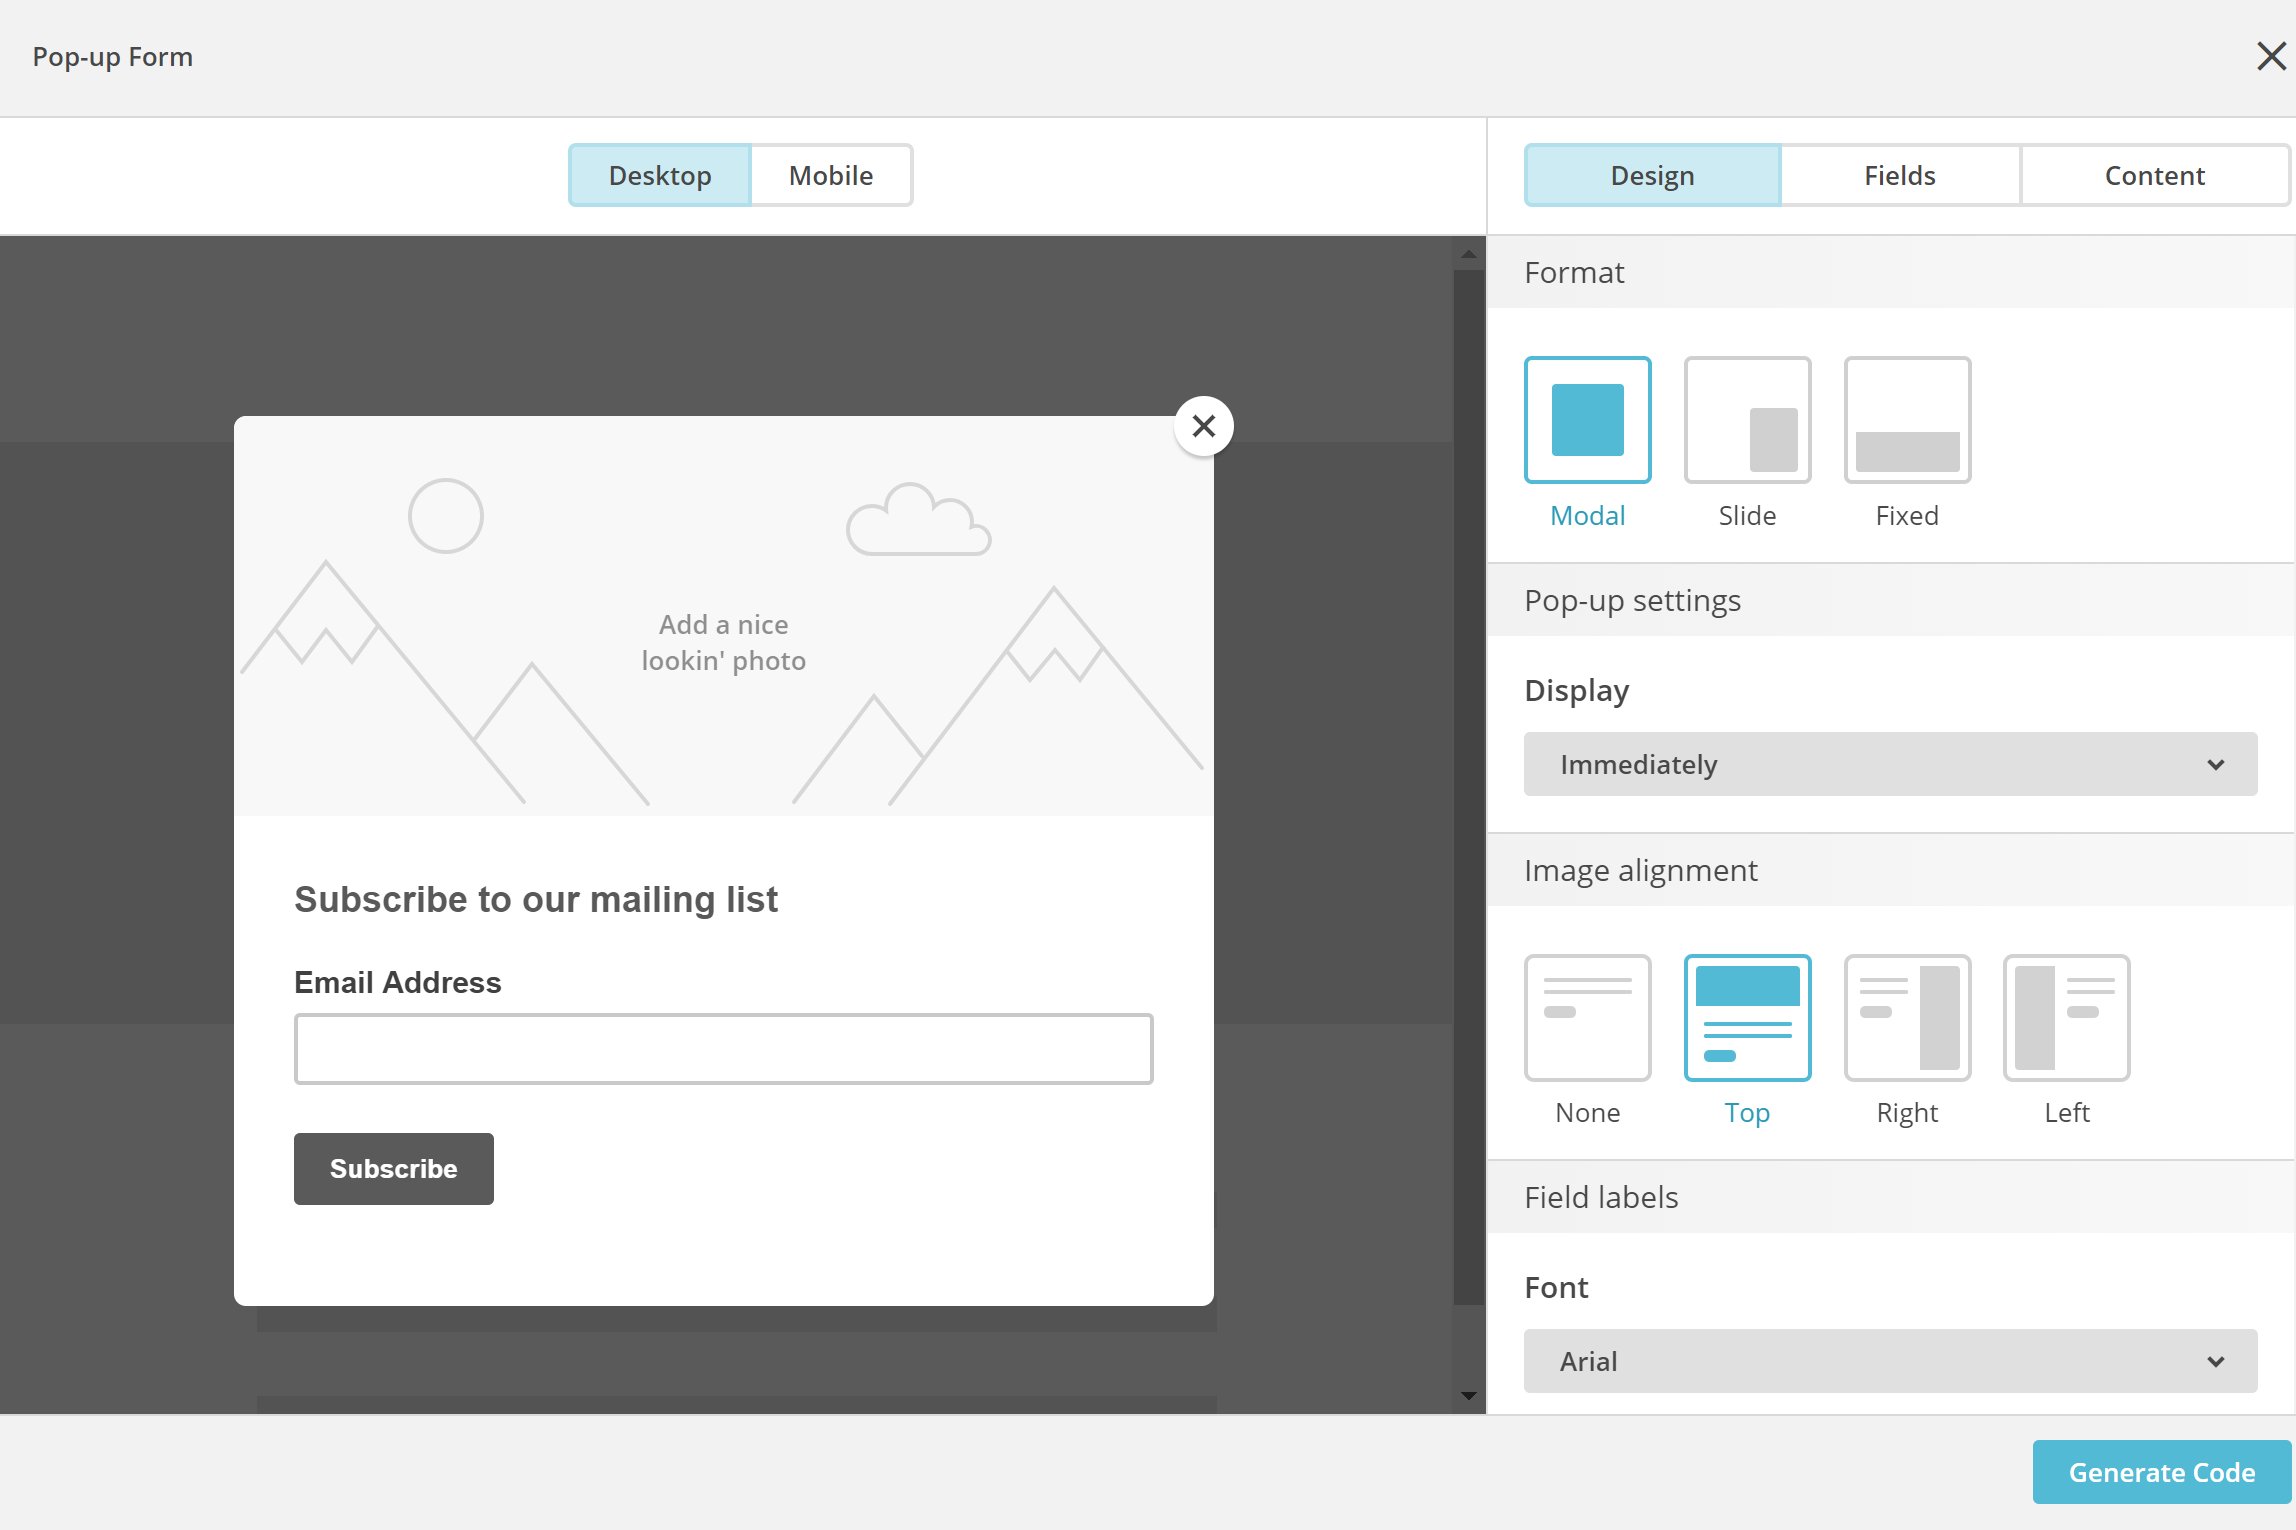 Customize your pop-up with the MailChimp pop-up creation tool